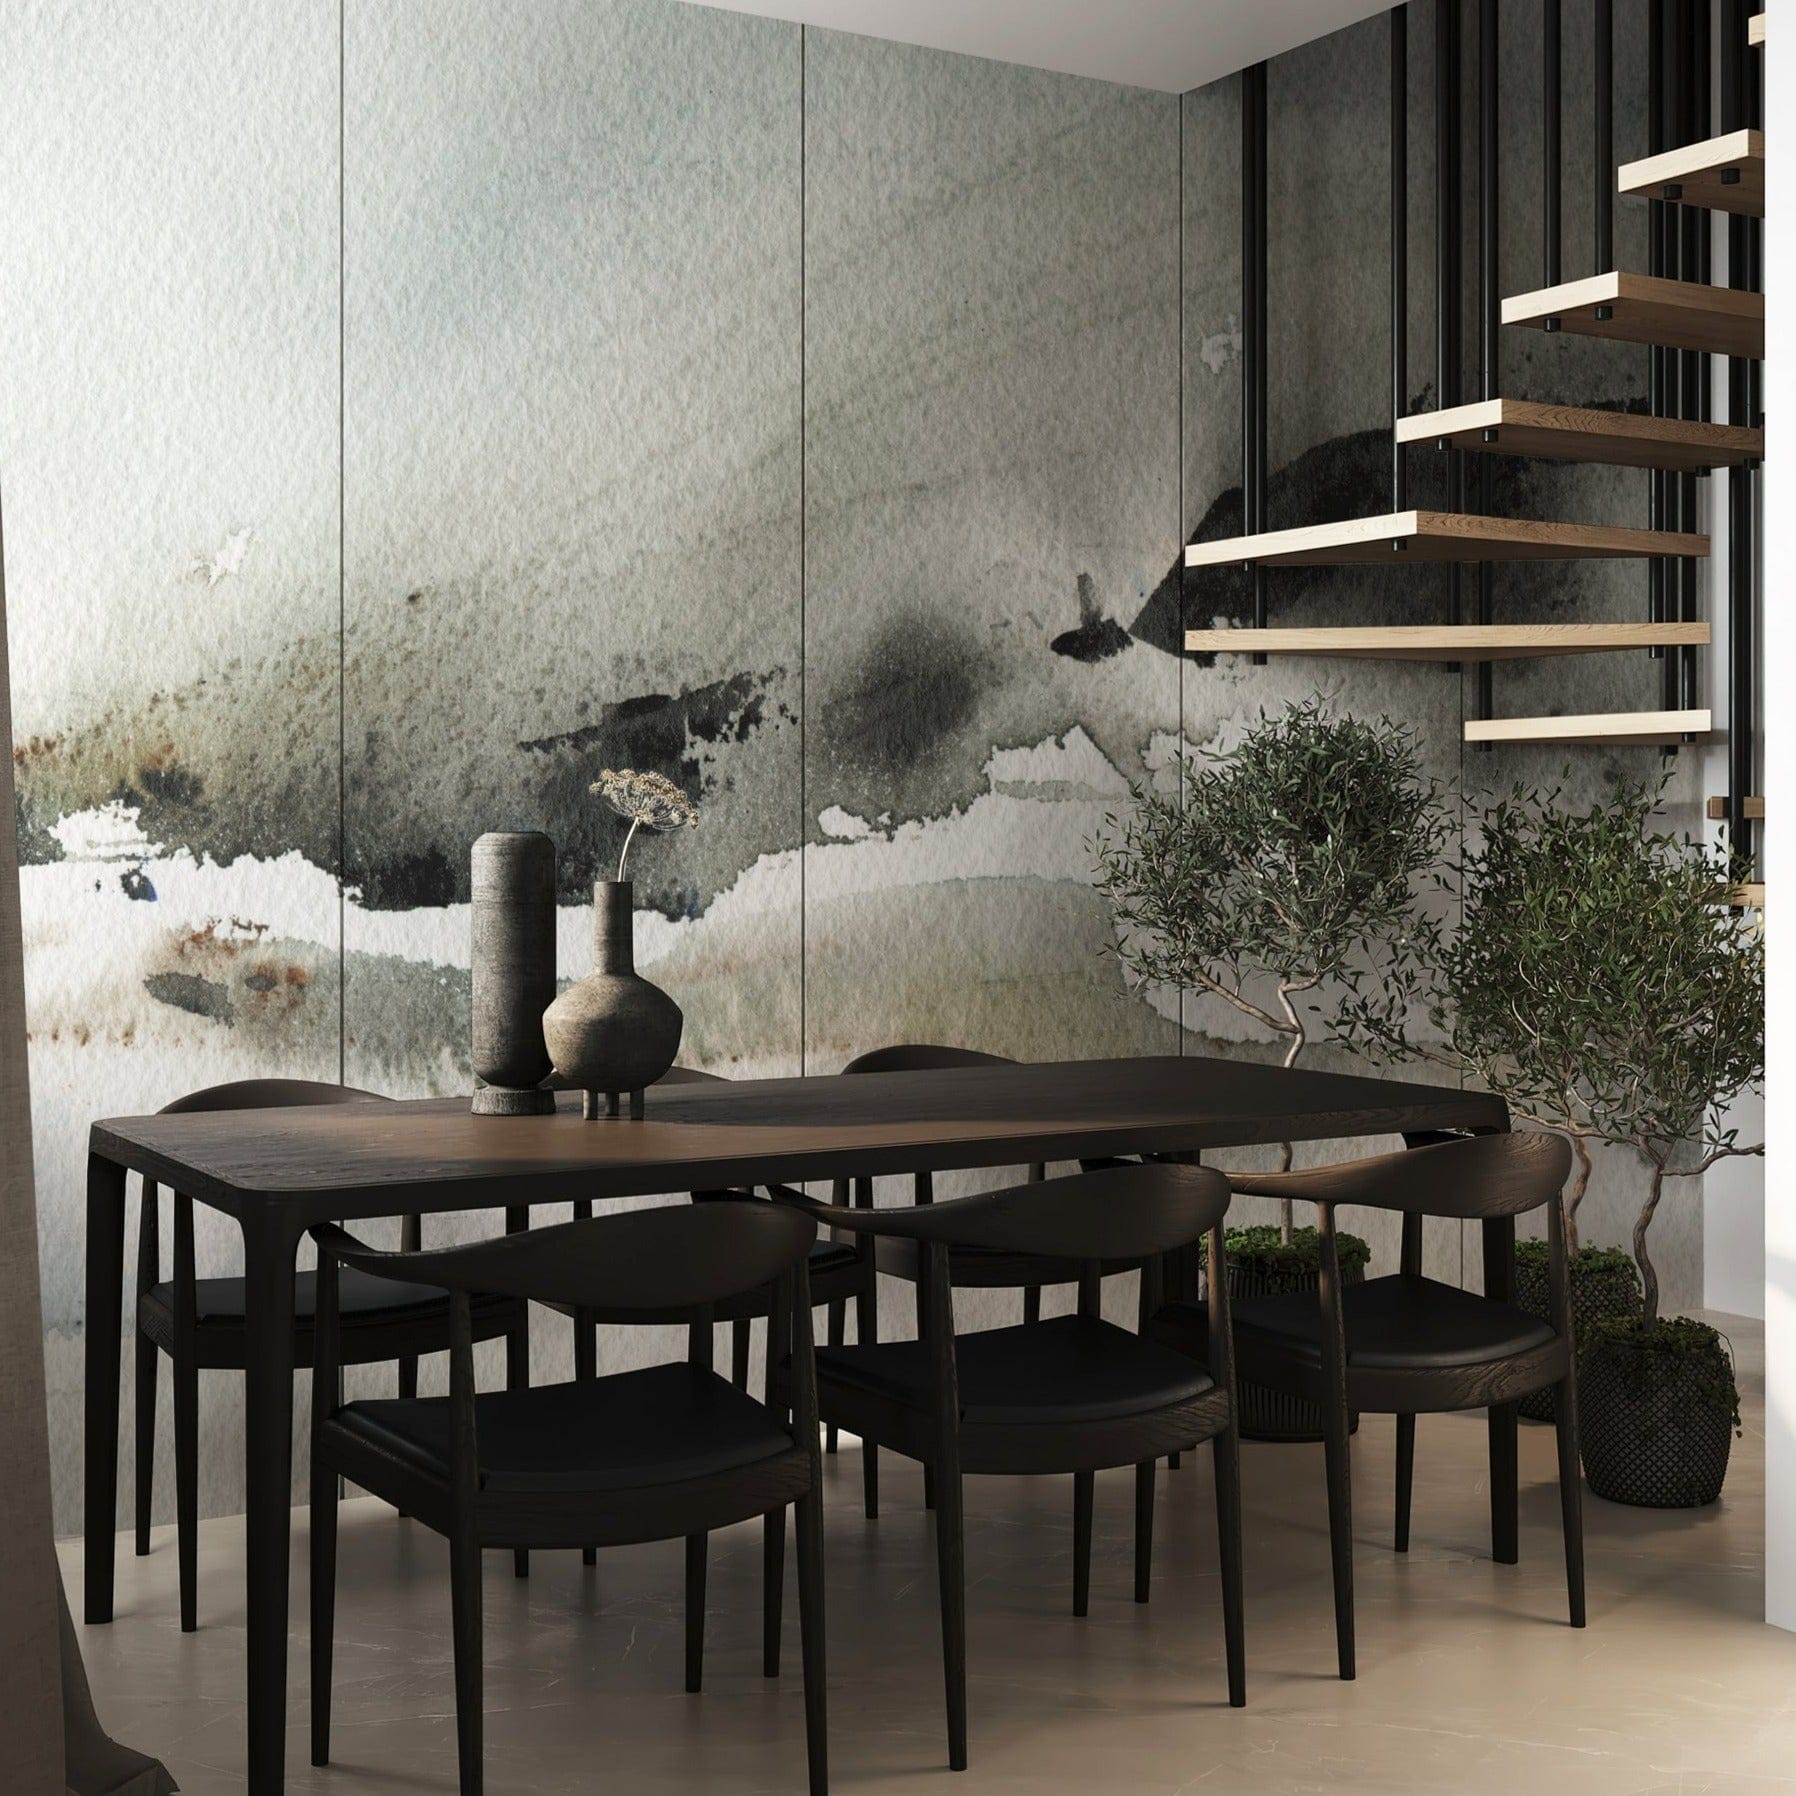 A dining area adorned with the "Atmospheric Abstraction" wall mural, showcasing a sweeping abstract landscape in muted tones. The elegant mural serves as a dramatic backdrop to a modern dining table surrounded by dark chairs, adding a touch of sophistication to the space.